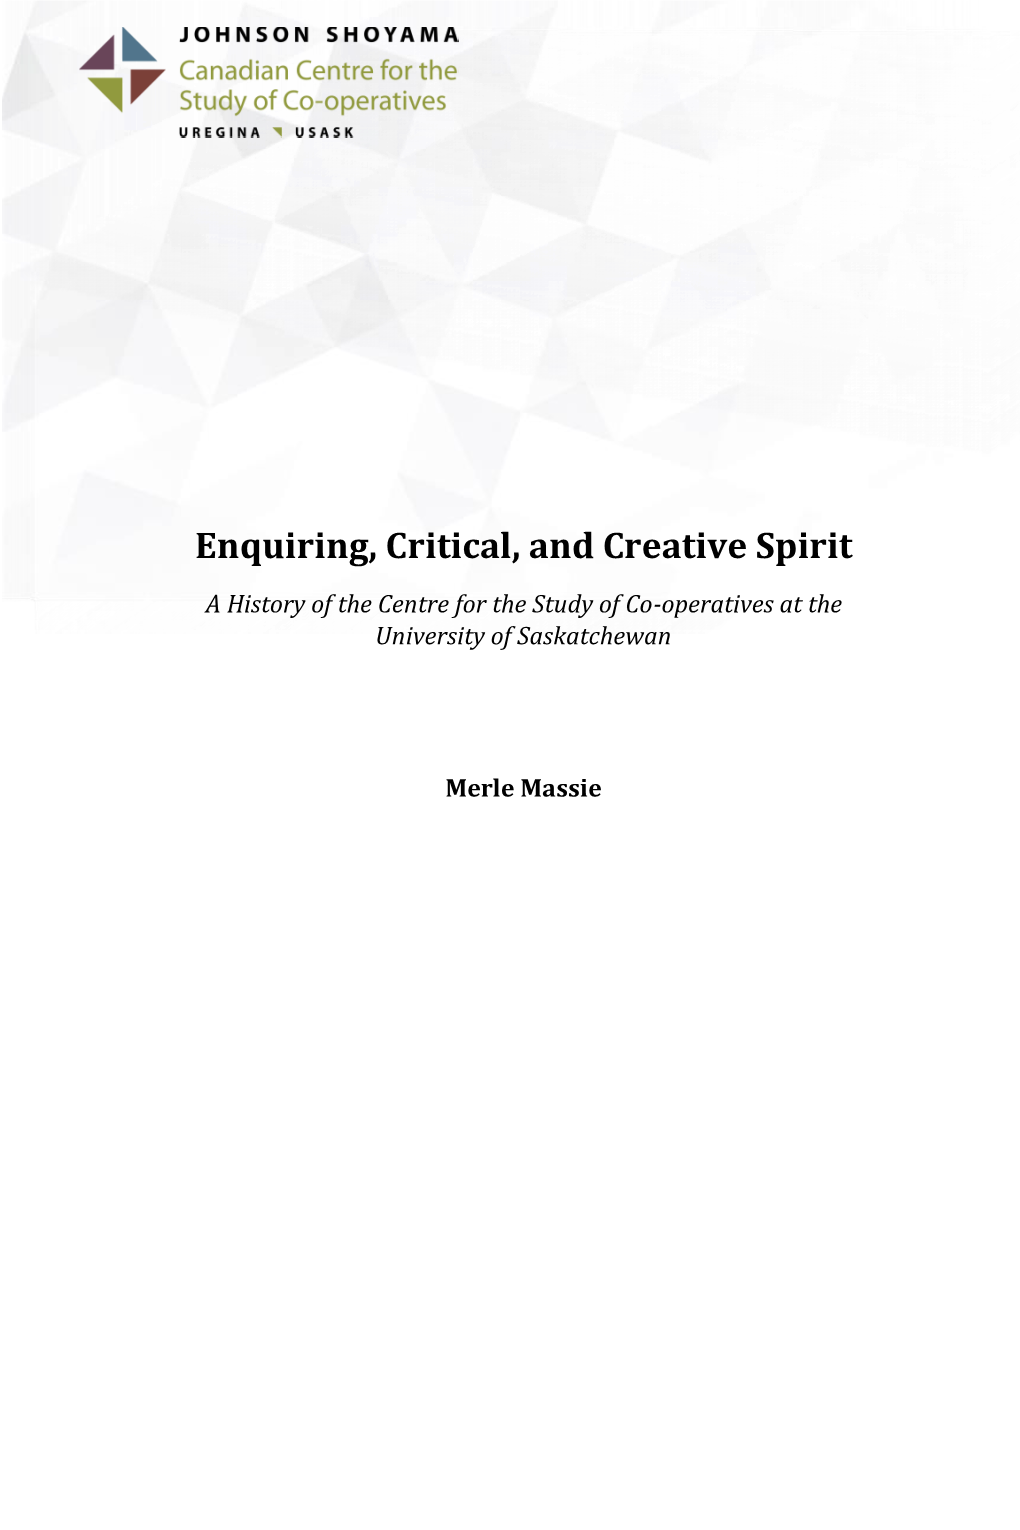 Enquiring, Critical, and Creative Spirit a History of the Centre for the Study of Co-Operatives at the University of Saskatchewan